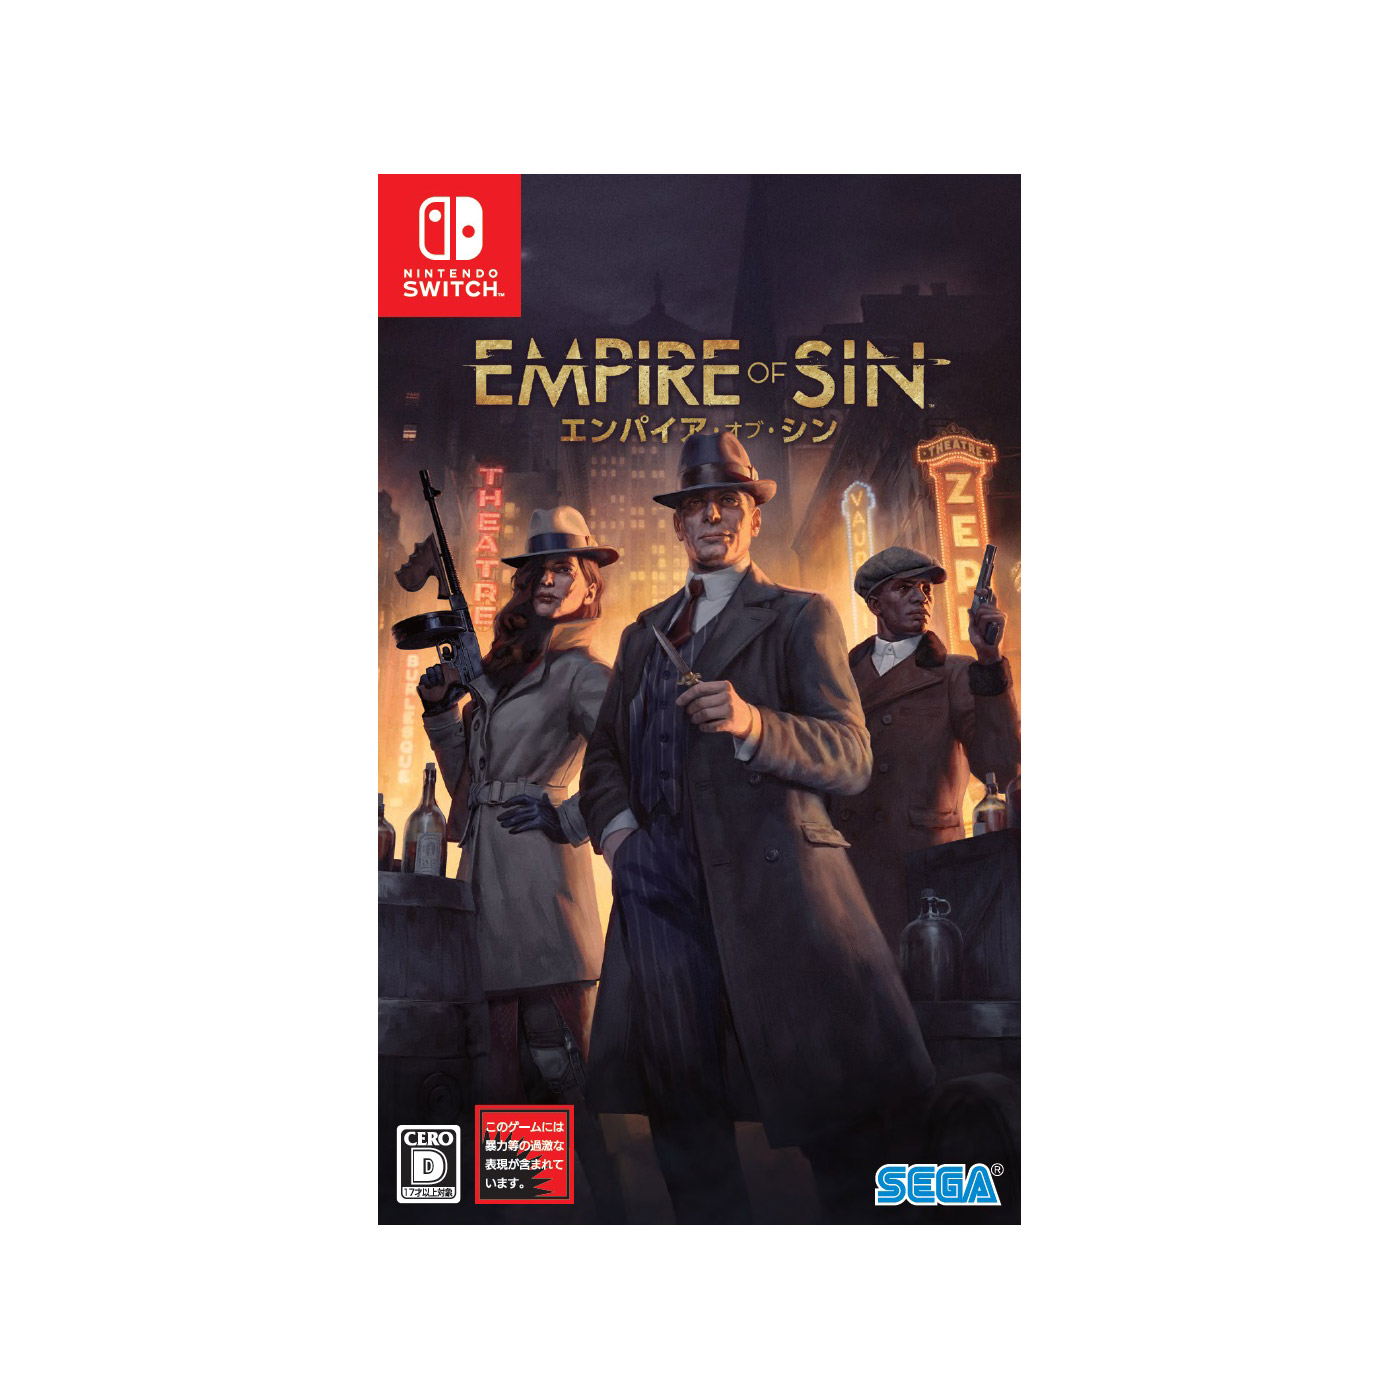 Empire of Sin　エンパイア・オブ・シン 【Switchゲームソフト】